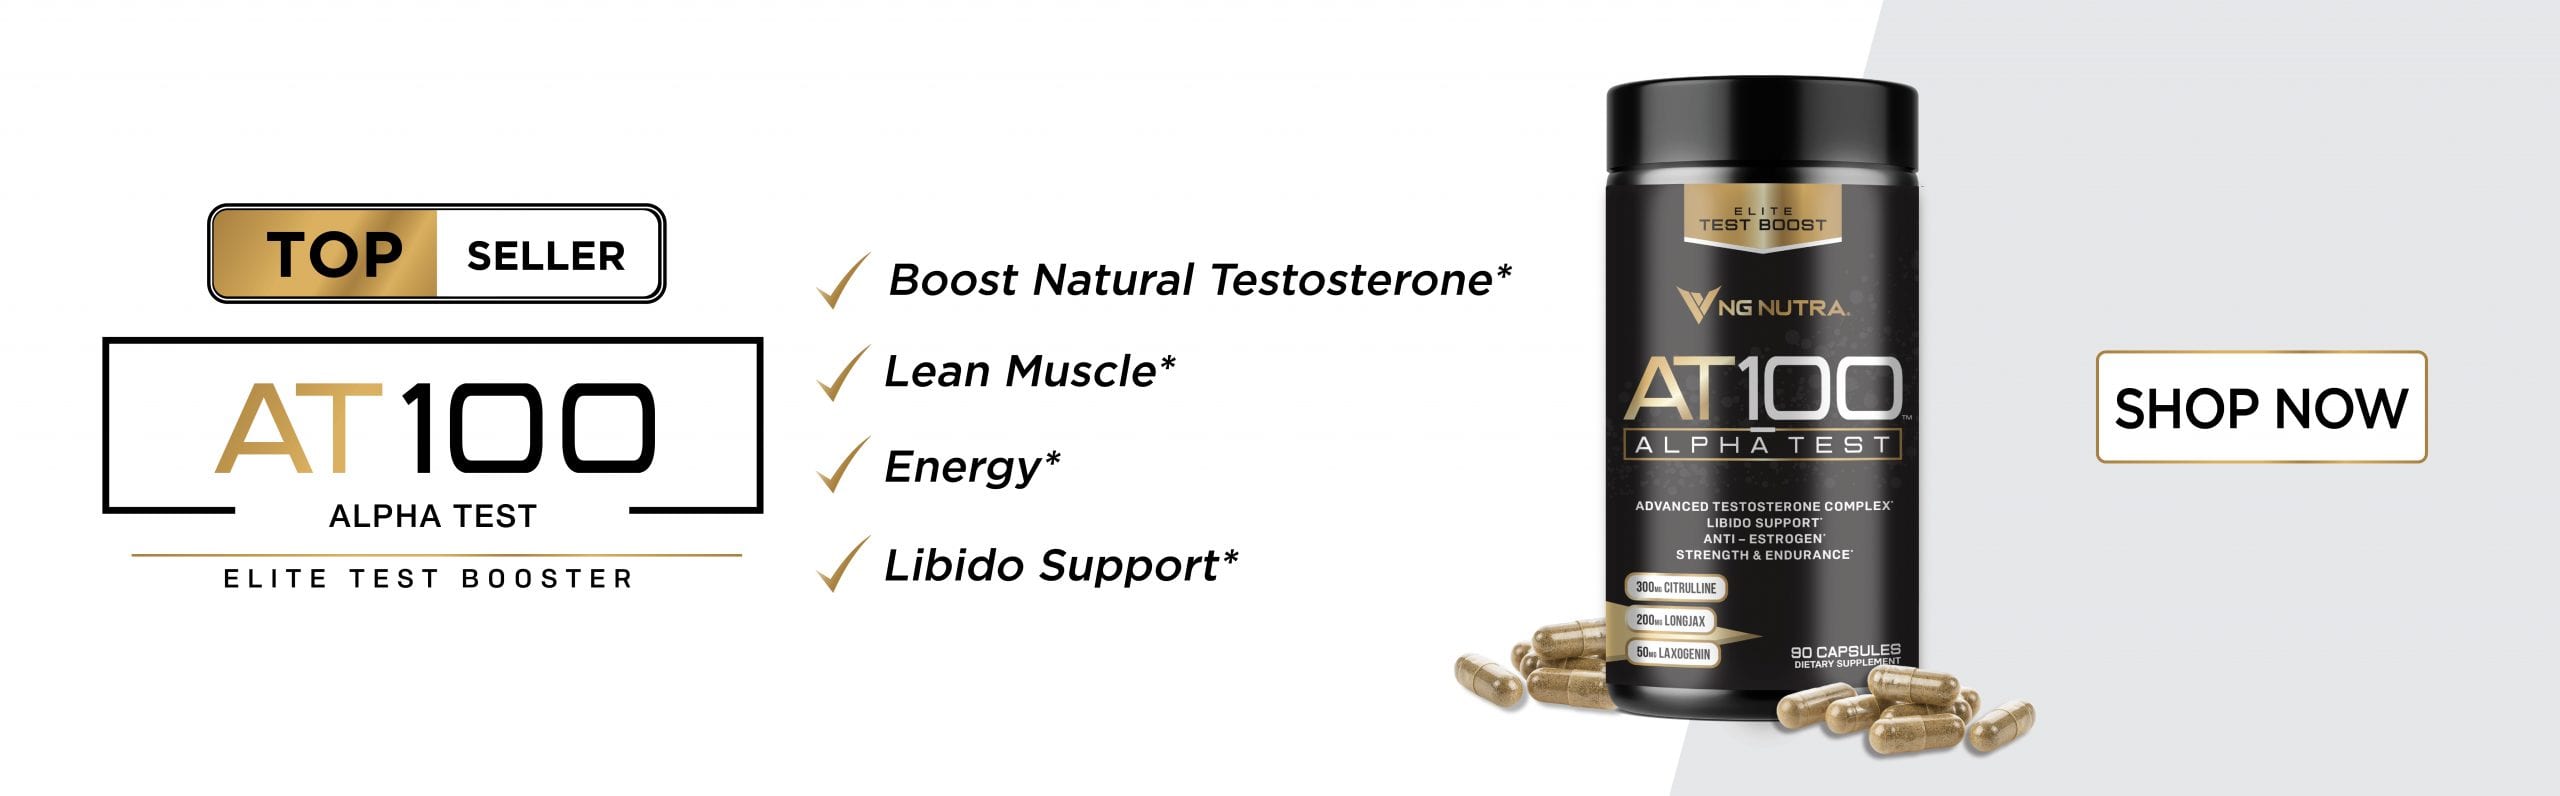 AT100- Testosterone Booster